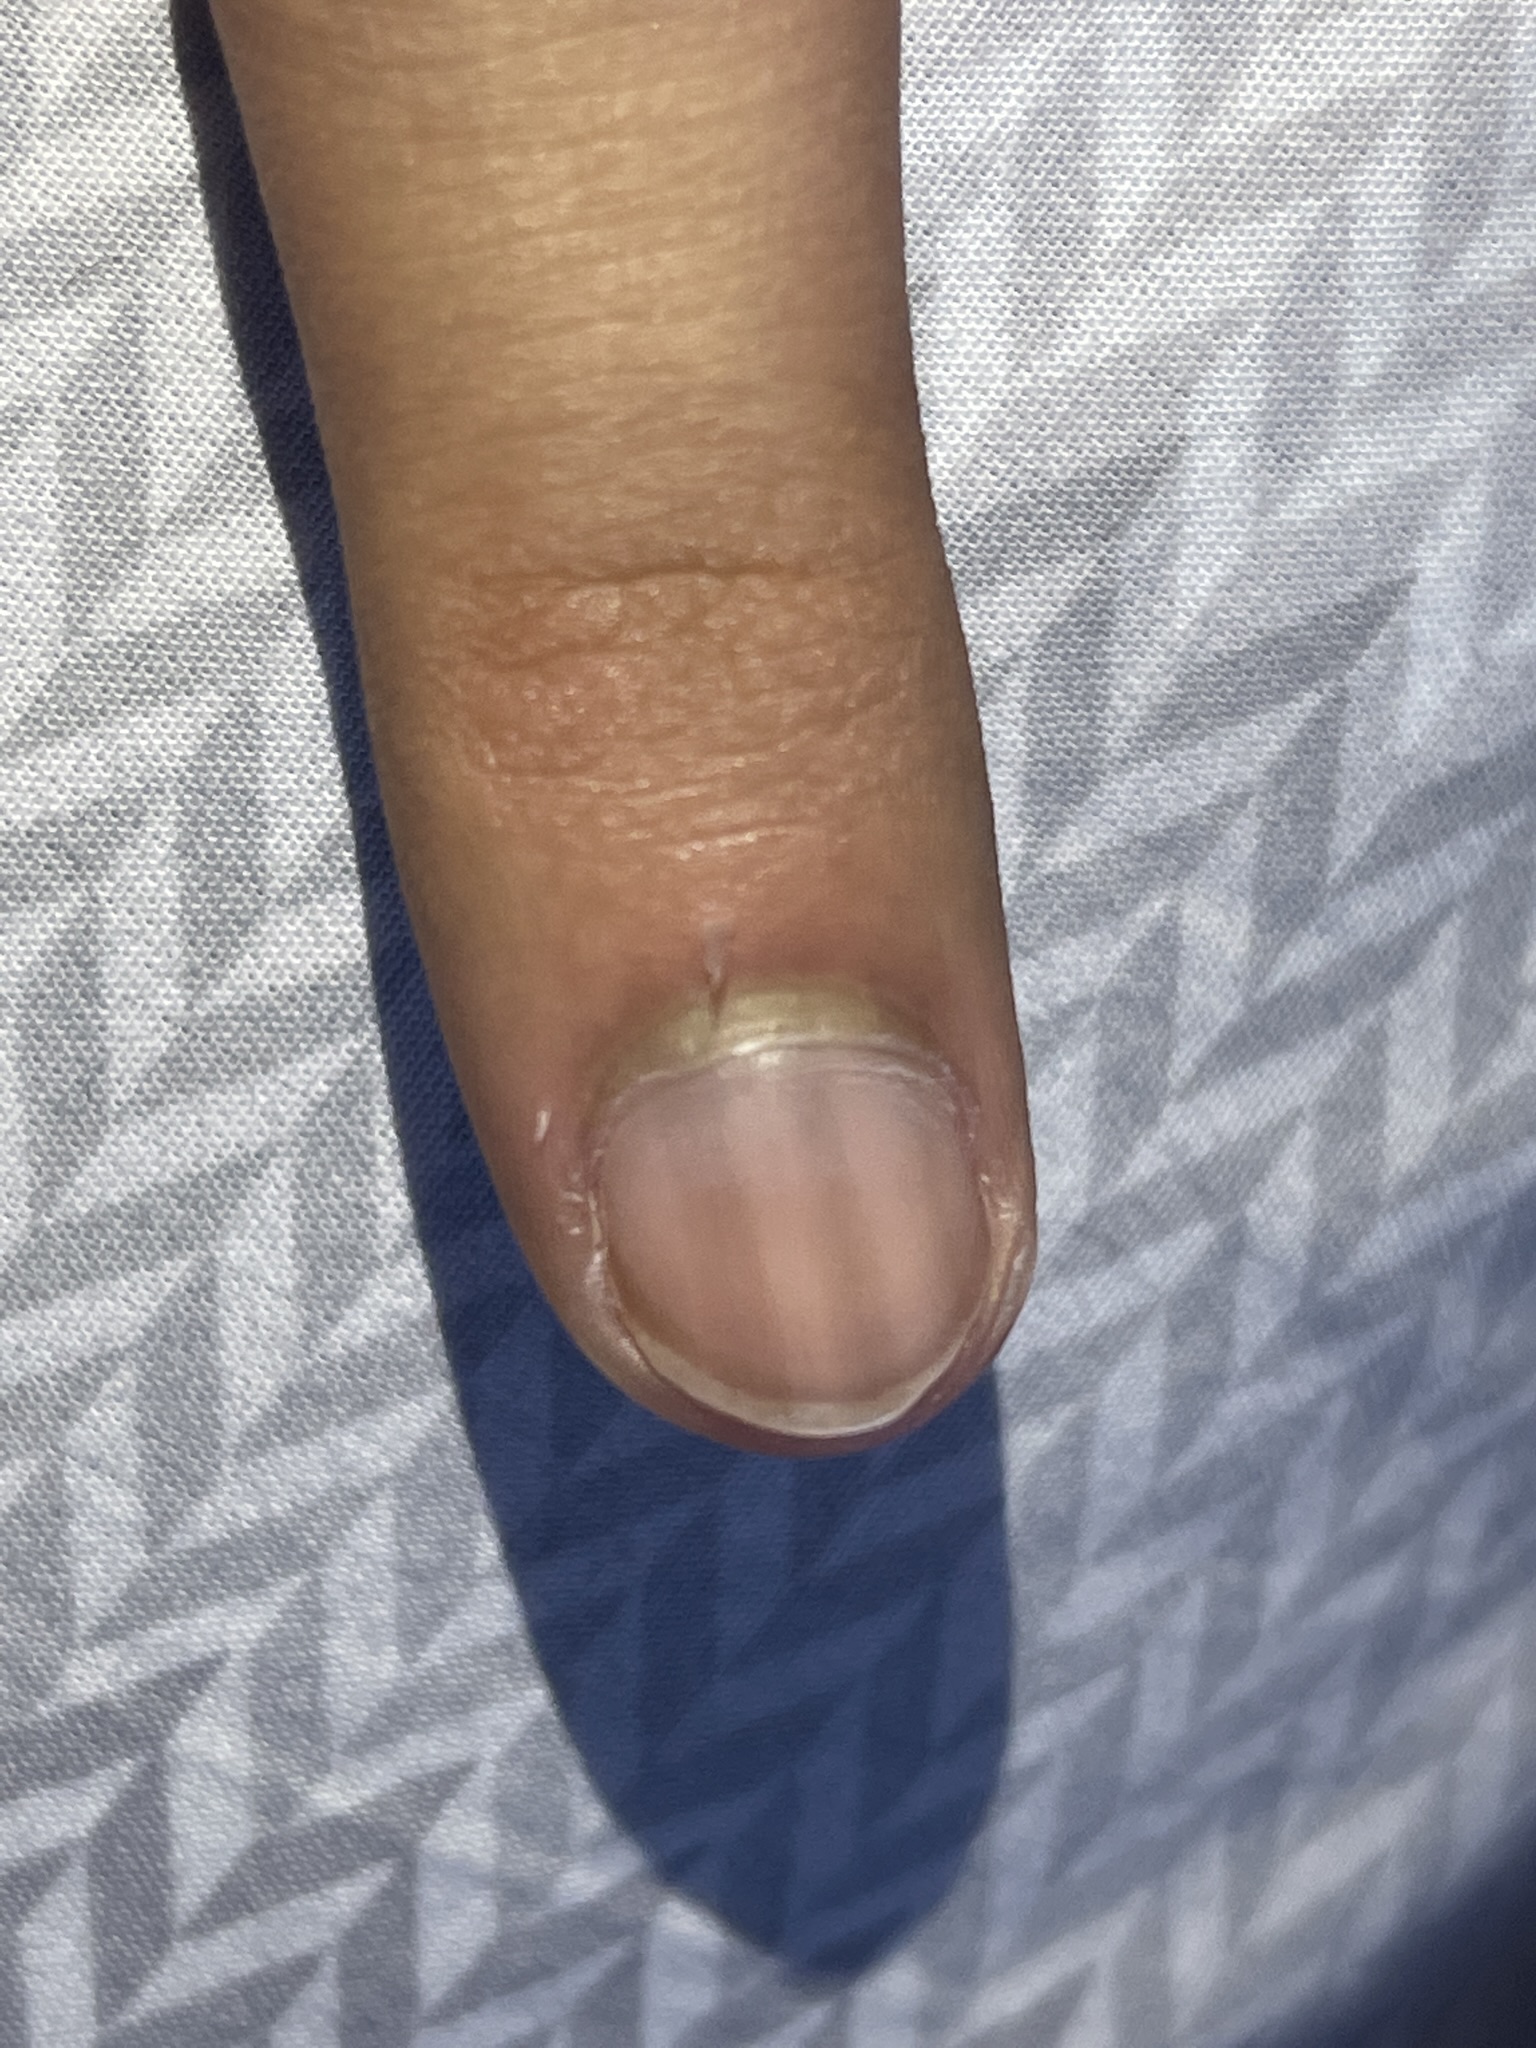 If You Have This Mark on Your Nail, You Should Get Checked for Cancer